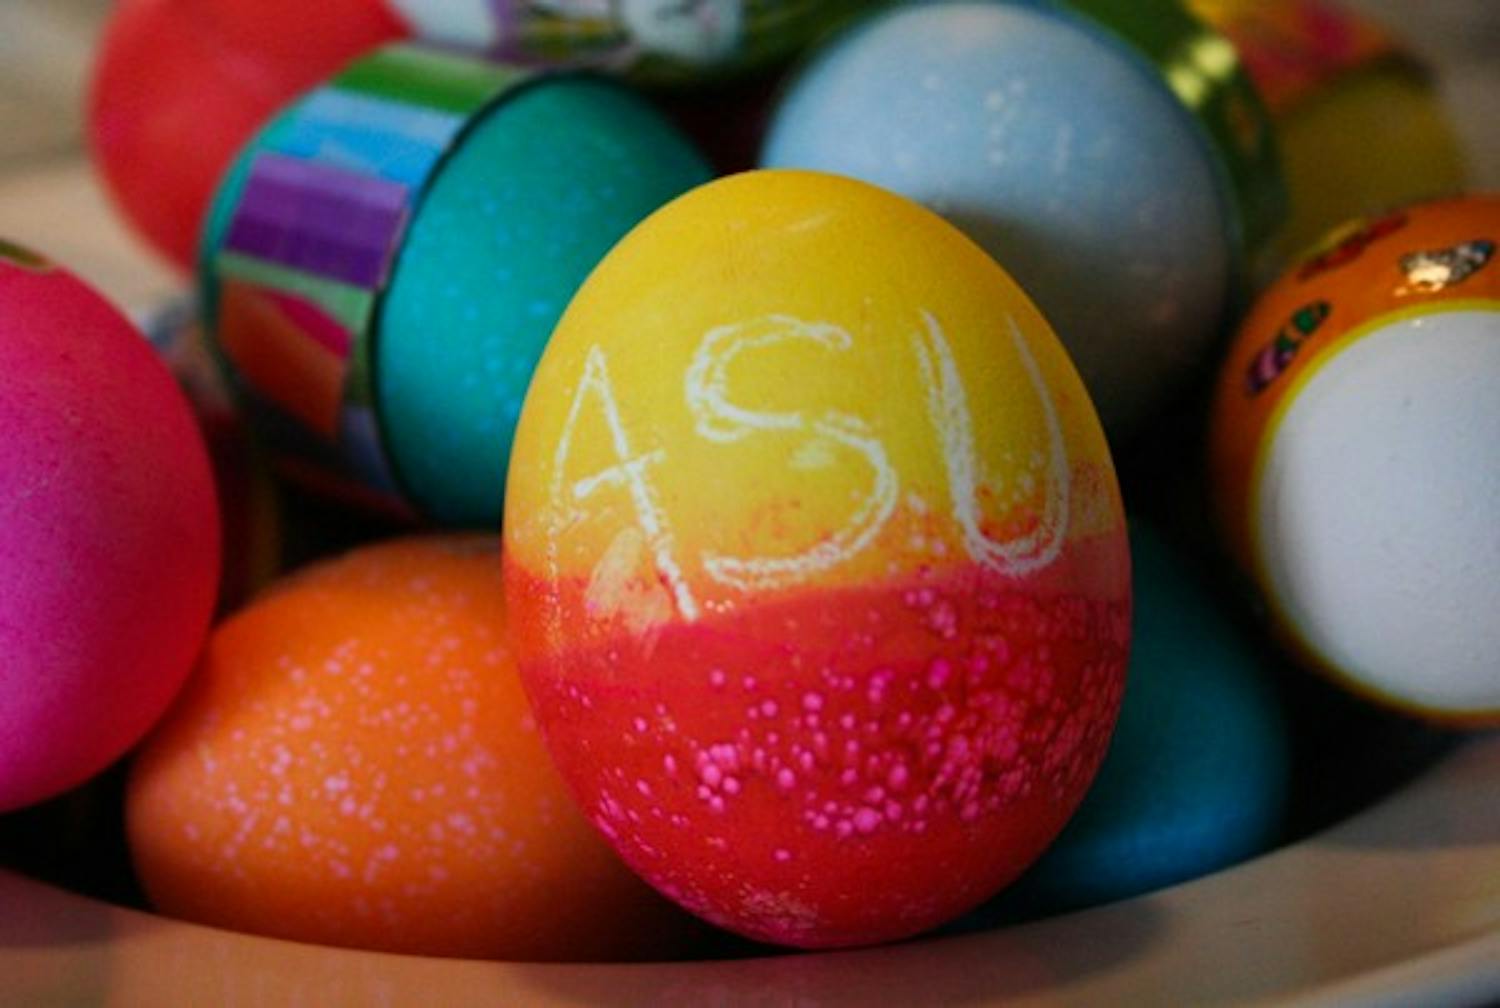 APPY EASTER: An ASU-themed Easter egg is set atop a basket of colored eggs to celebrate the holiday on Sunday. (Photo by Lisa Bartoli)